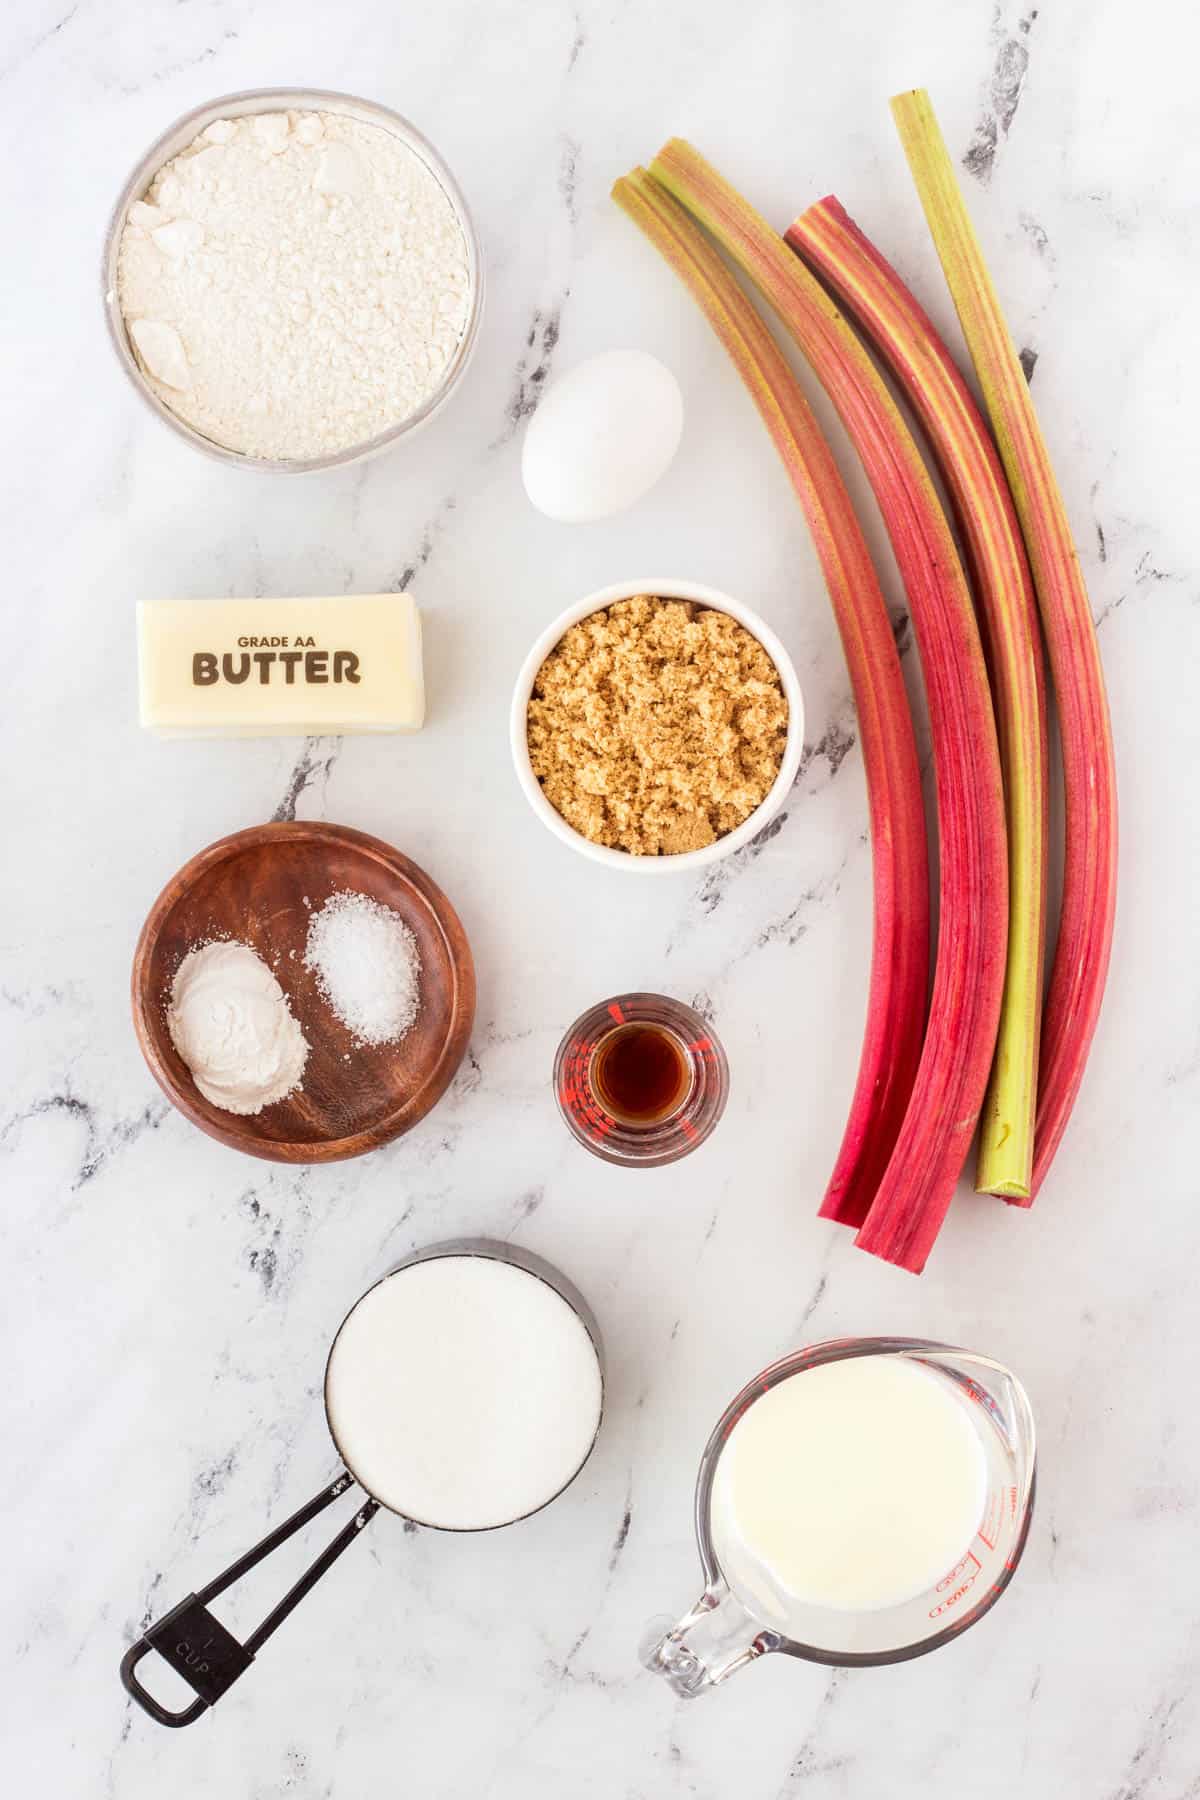 Ingredients for Old-Fashioned Rhubarb Pudding Cake